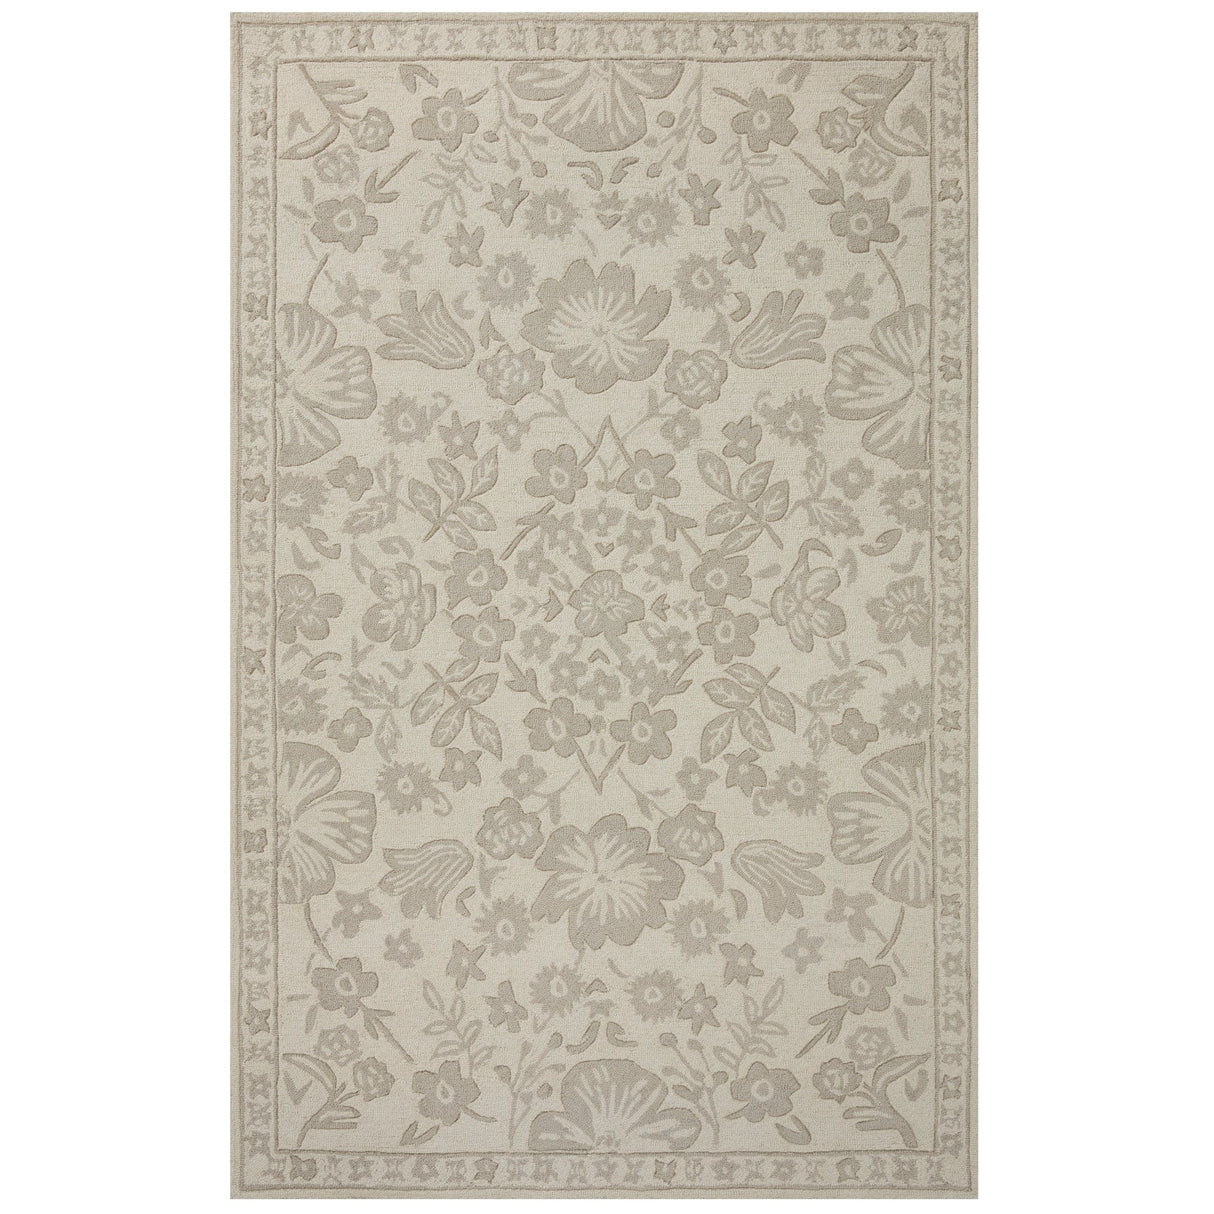 Loloi Rifle Paper Co. Rose Garden Rug Rugs